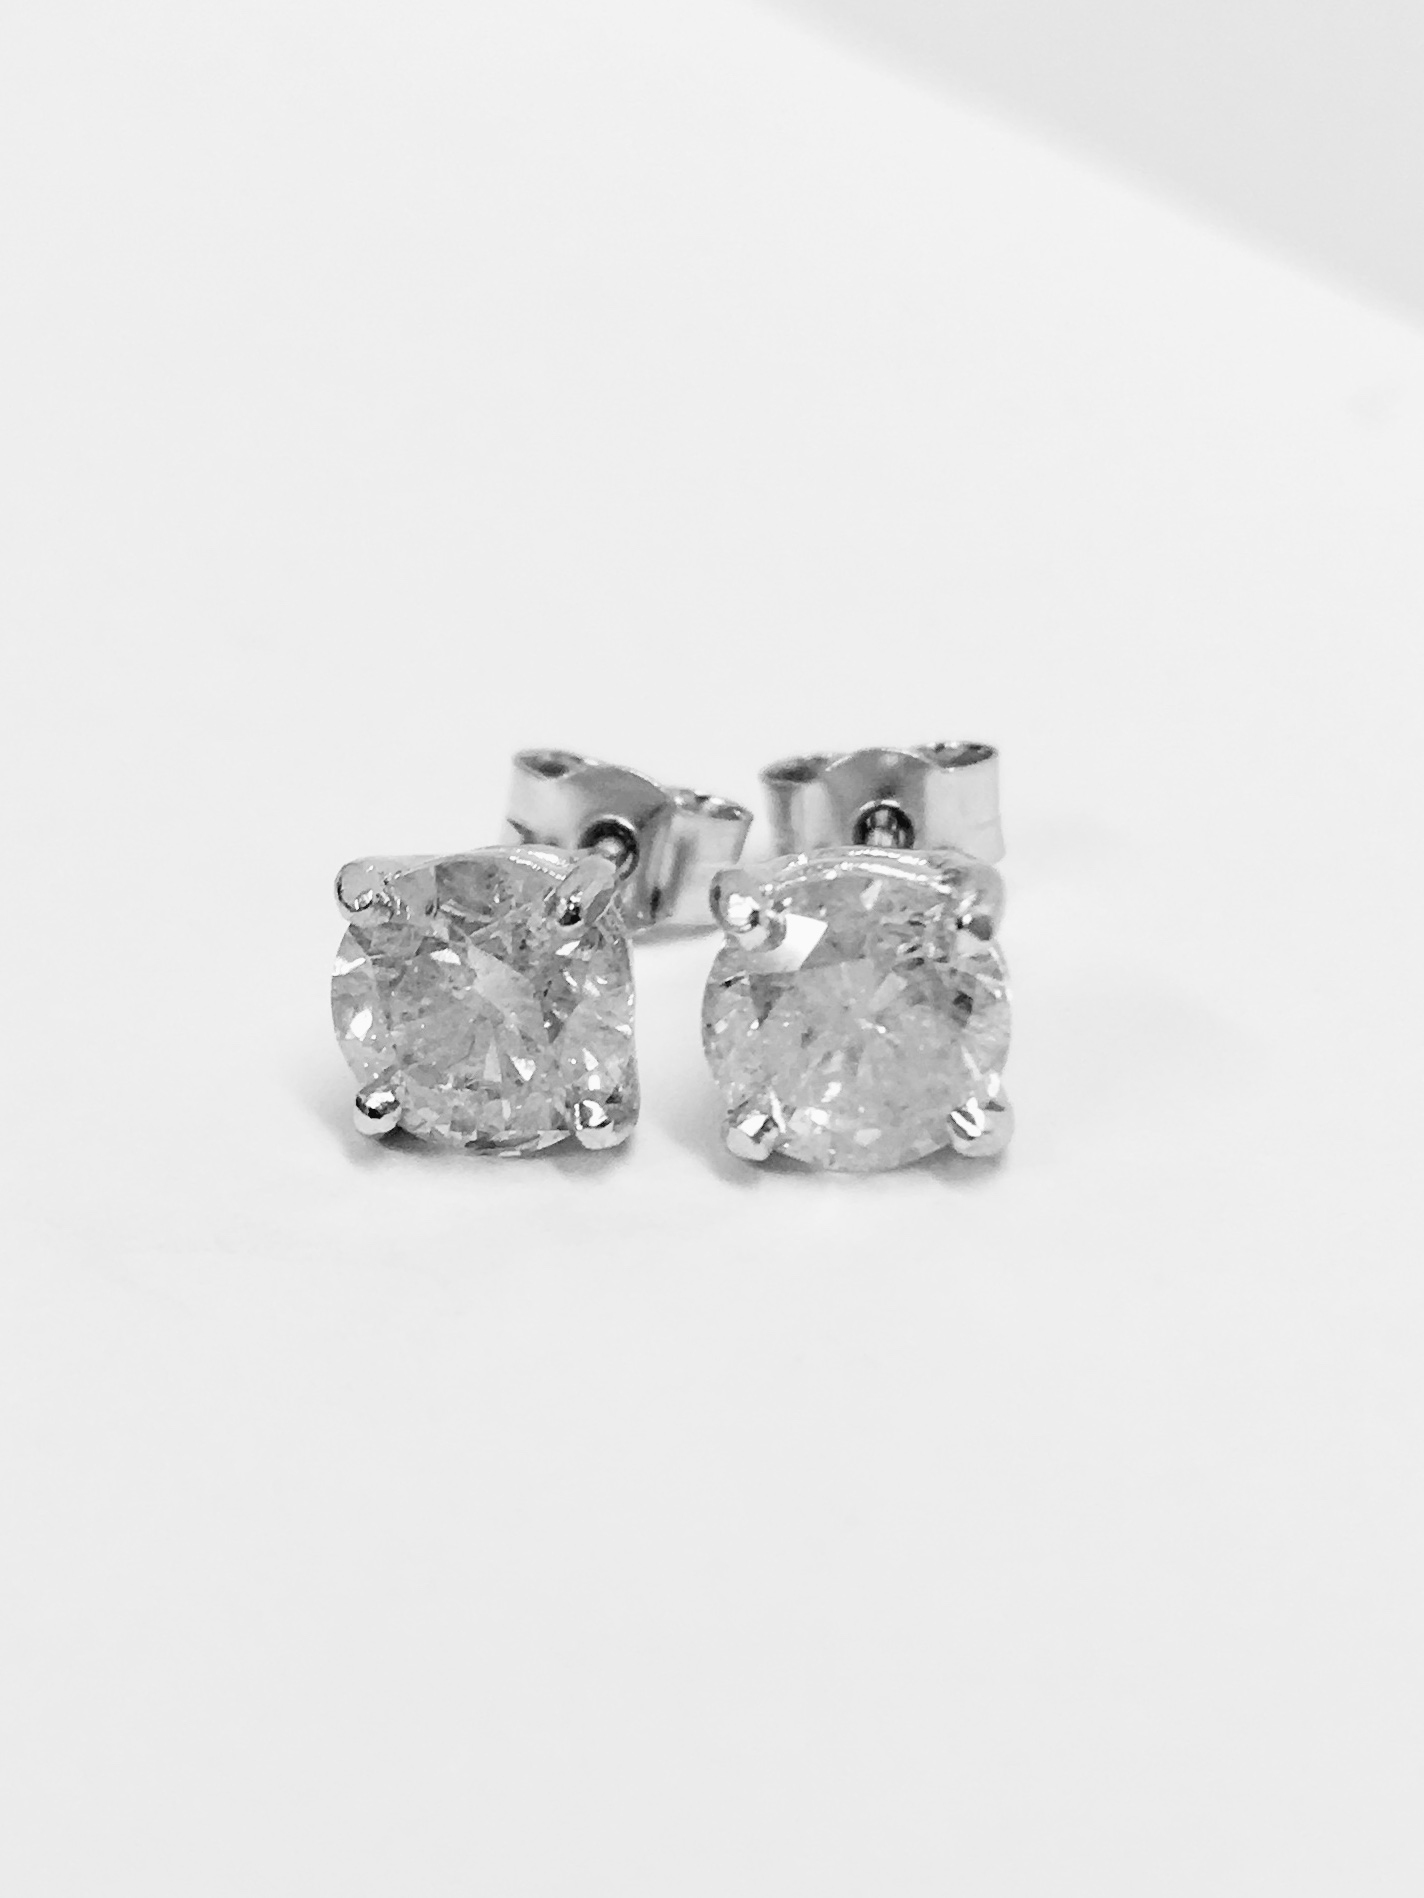 1ct diamond solitaire earrings - Image 5 of 24